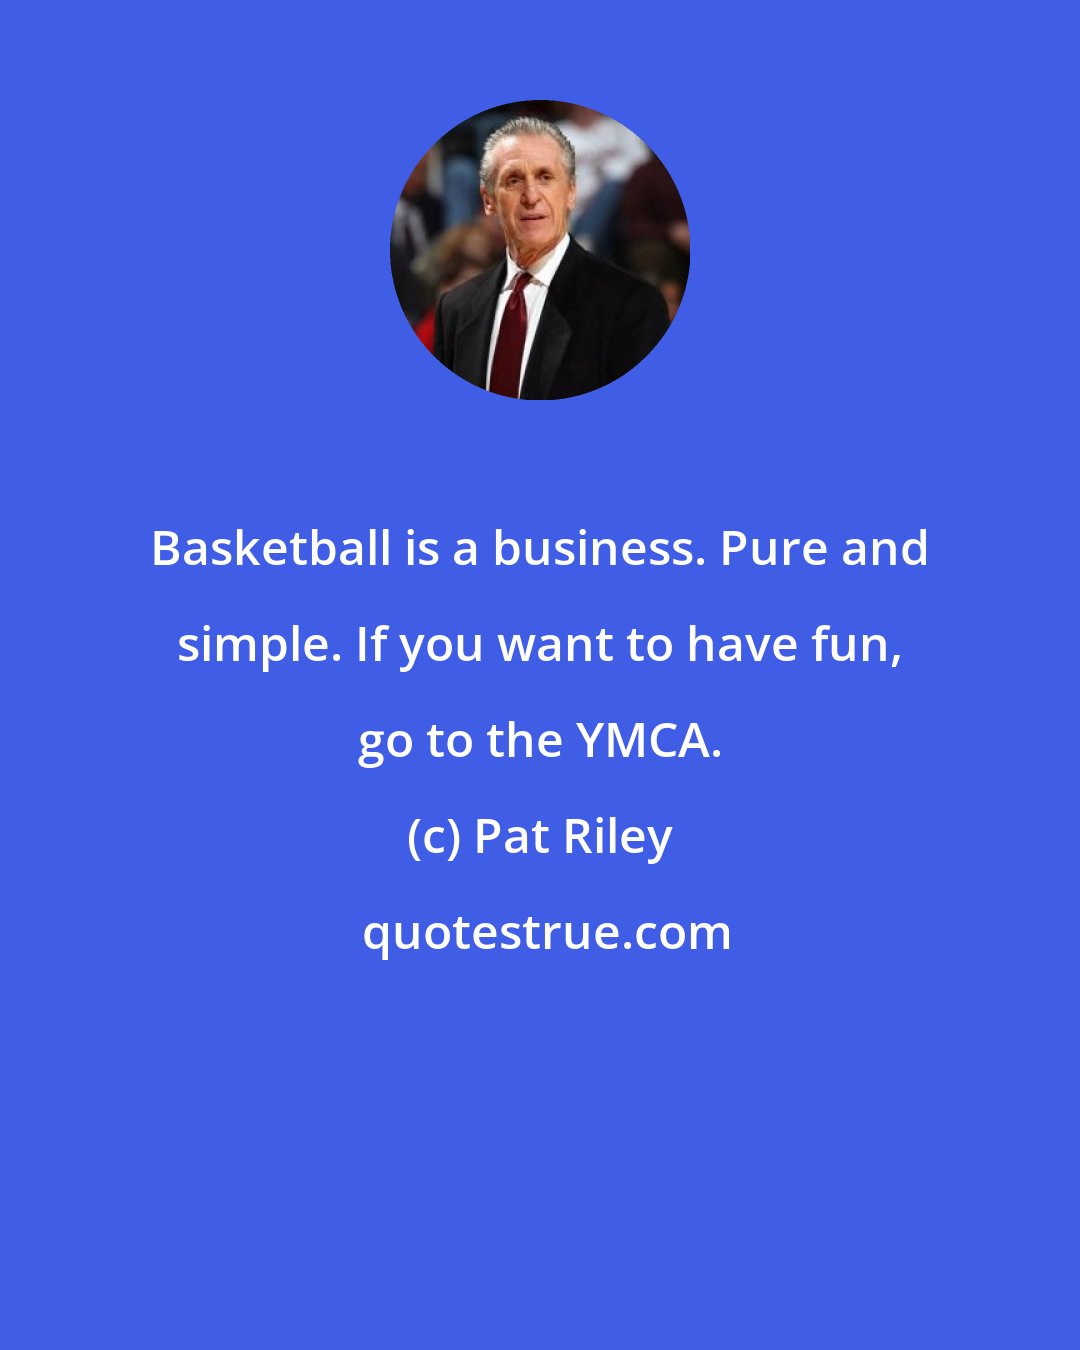 Pat Riley: Basketball is a business. Pure and simple. If you want to have fun, go to the YMCA.